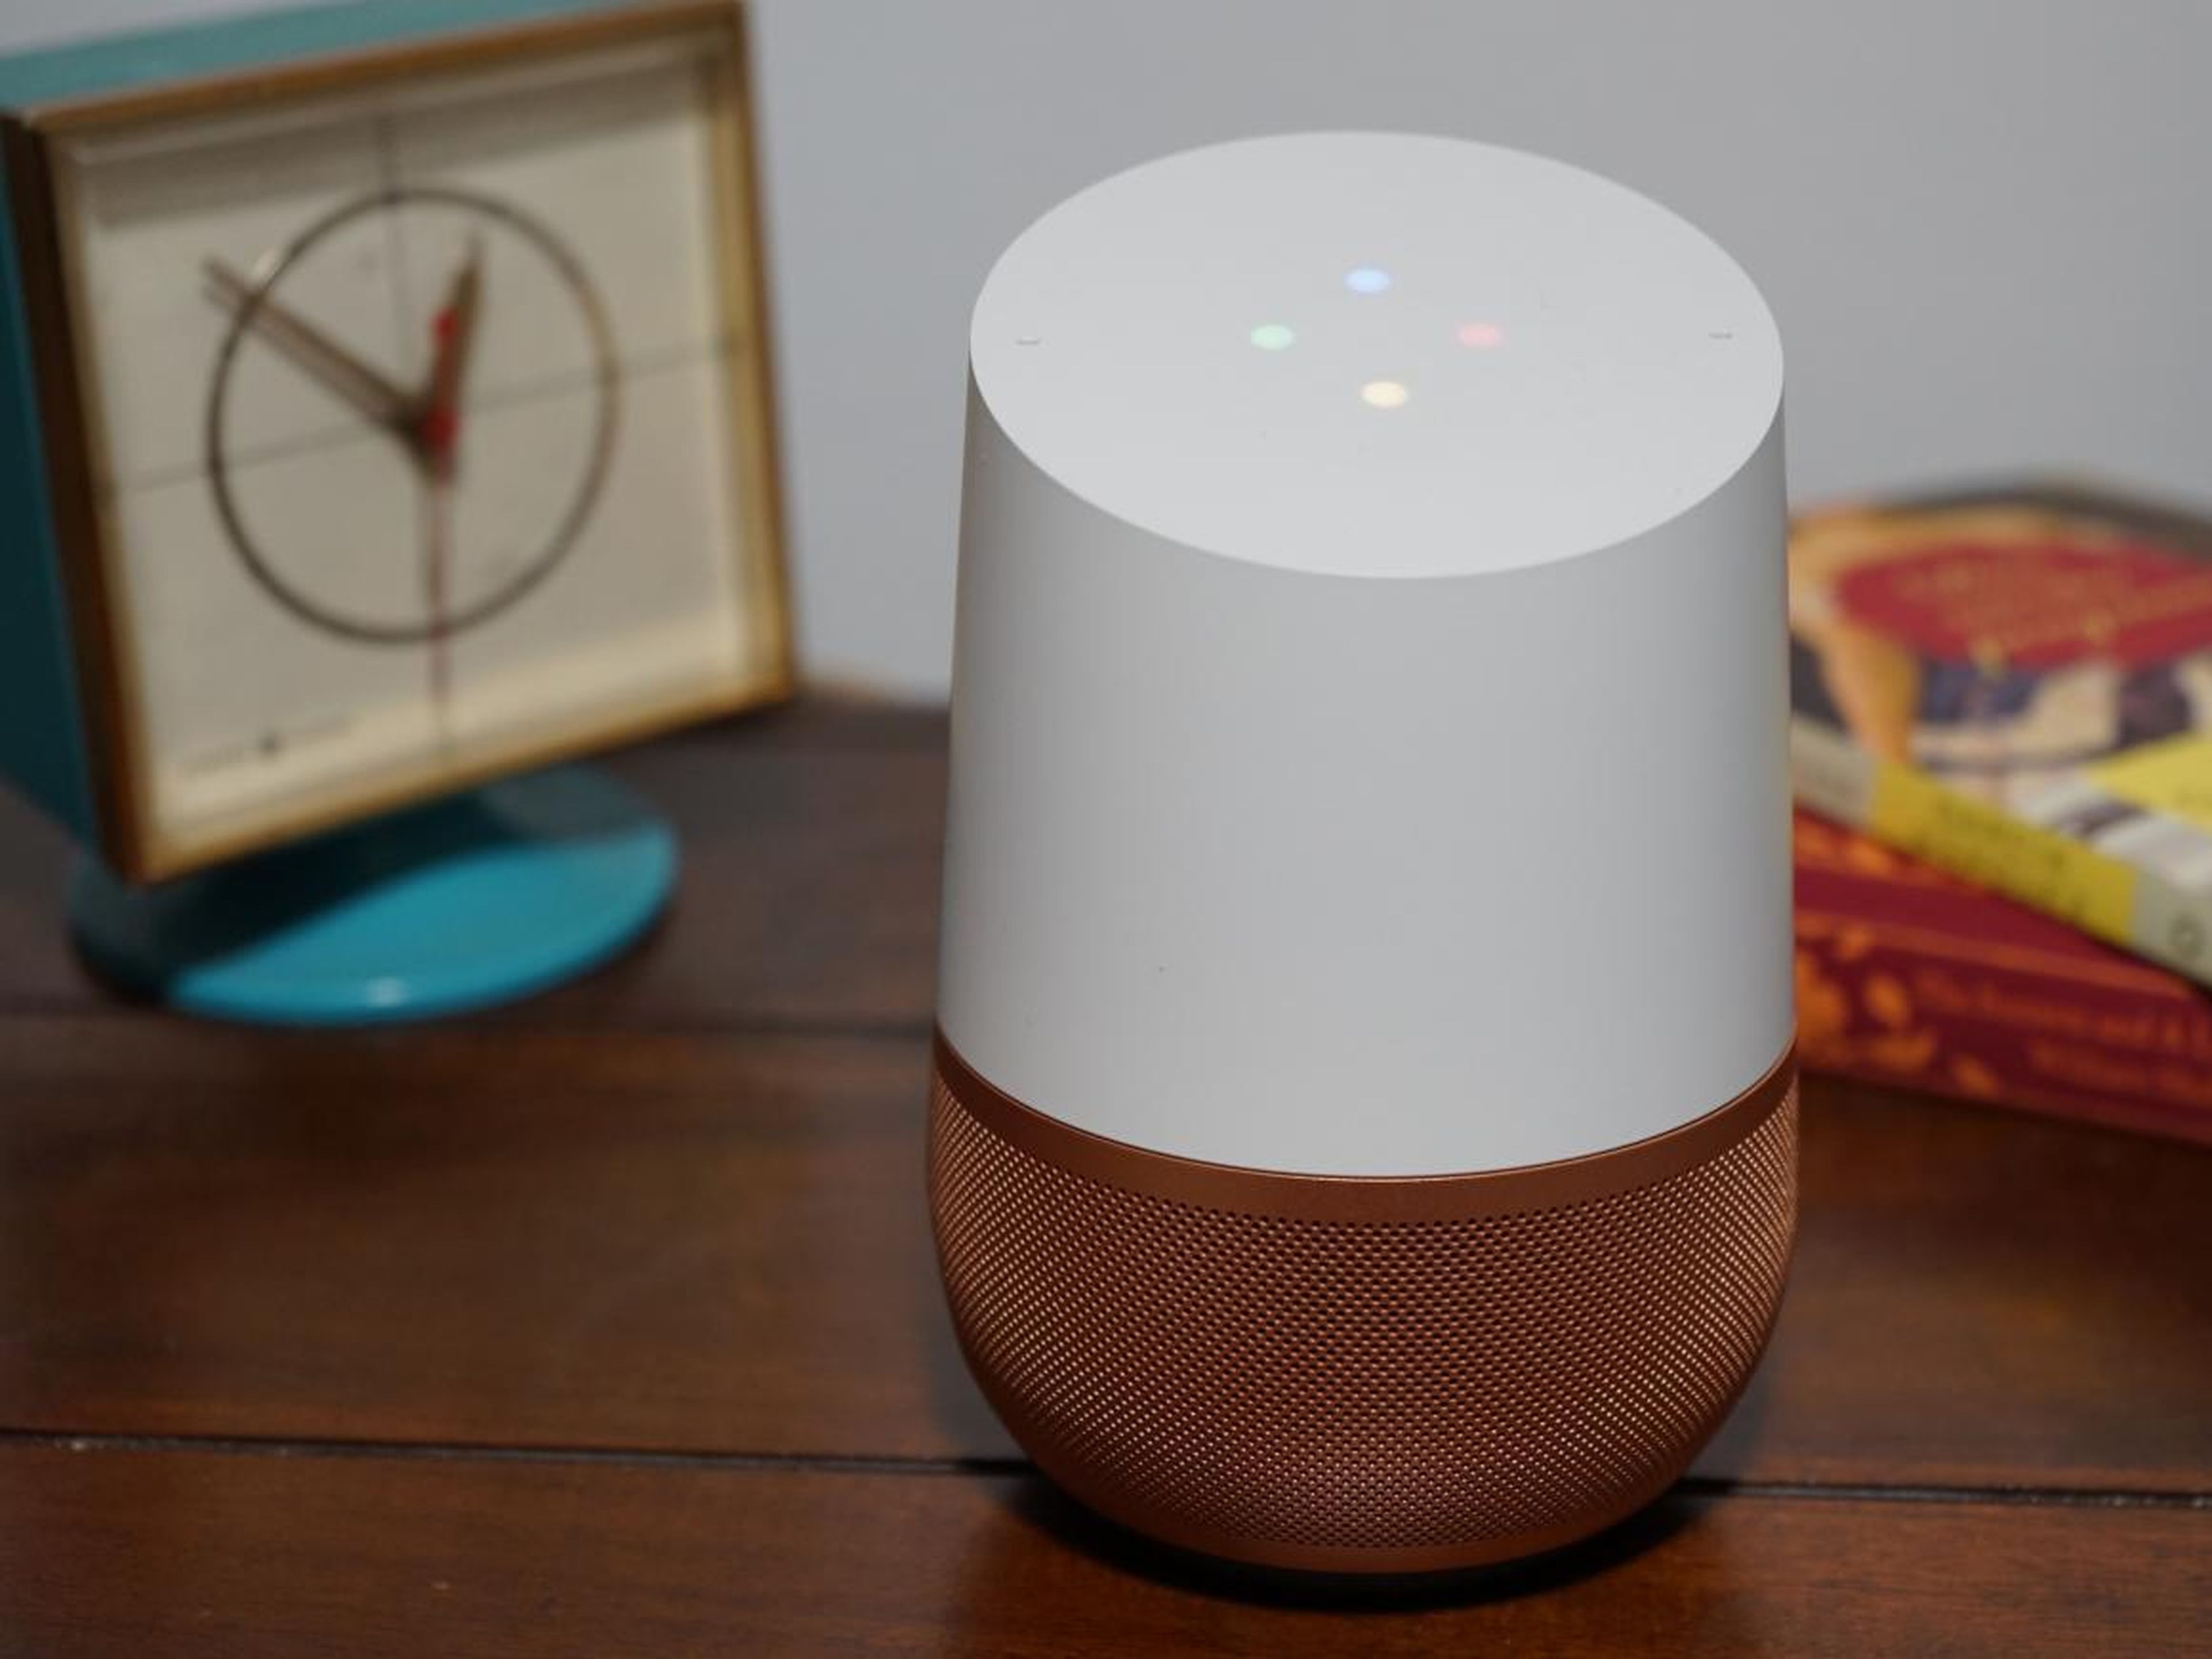 We tested the Amazon Echo and the Google Home to see which smart speaker is best, and it was extremely close